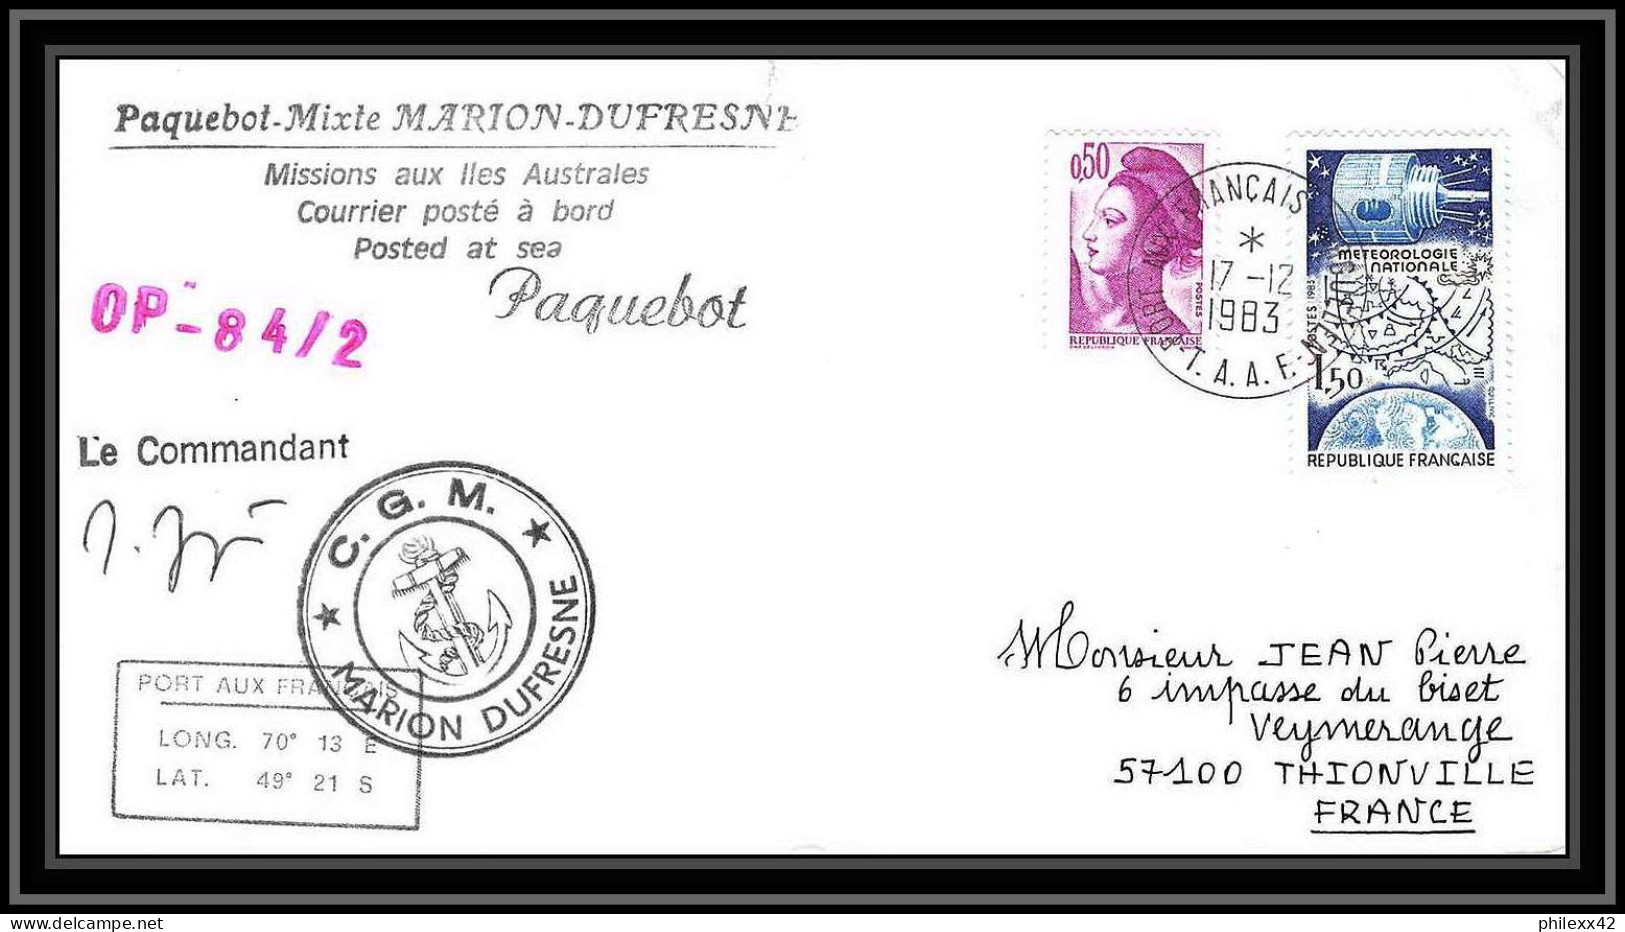 0750 Taaf Terres Australes Antarctic Lettre (cover) 17/12/1983 Divers Dufresne Signé Signed Paquebot  - Covers & Documents